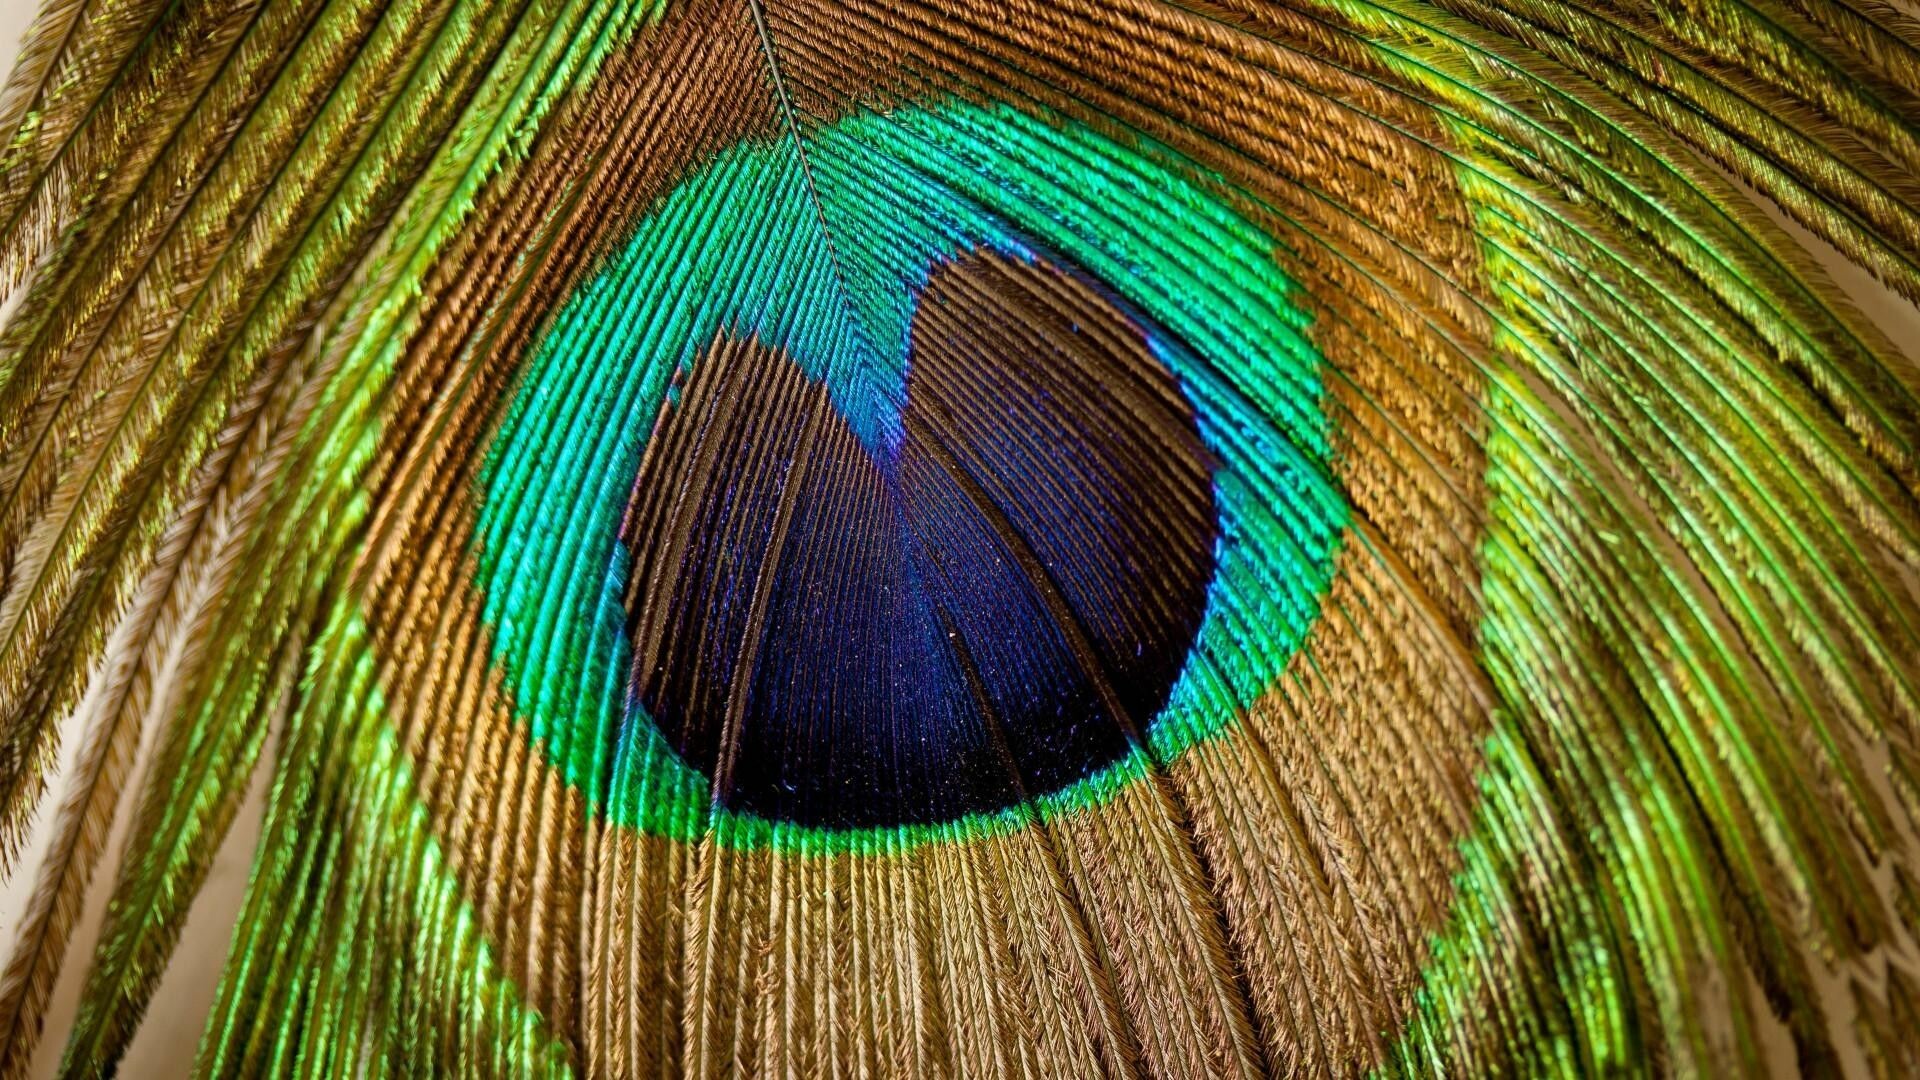 Peacock: Tail feathers have eye-like spots, surrounded with red, green, gold, and red feathers. 1920x1080 Full HD Wallpaper.